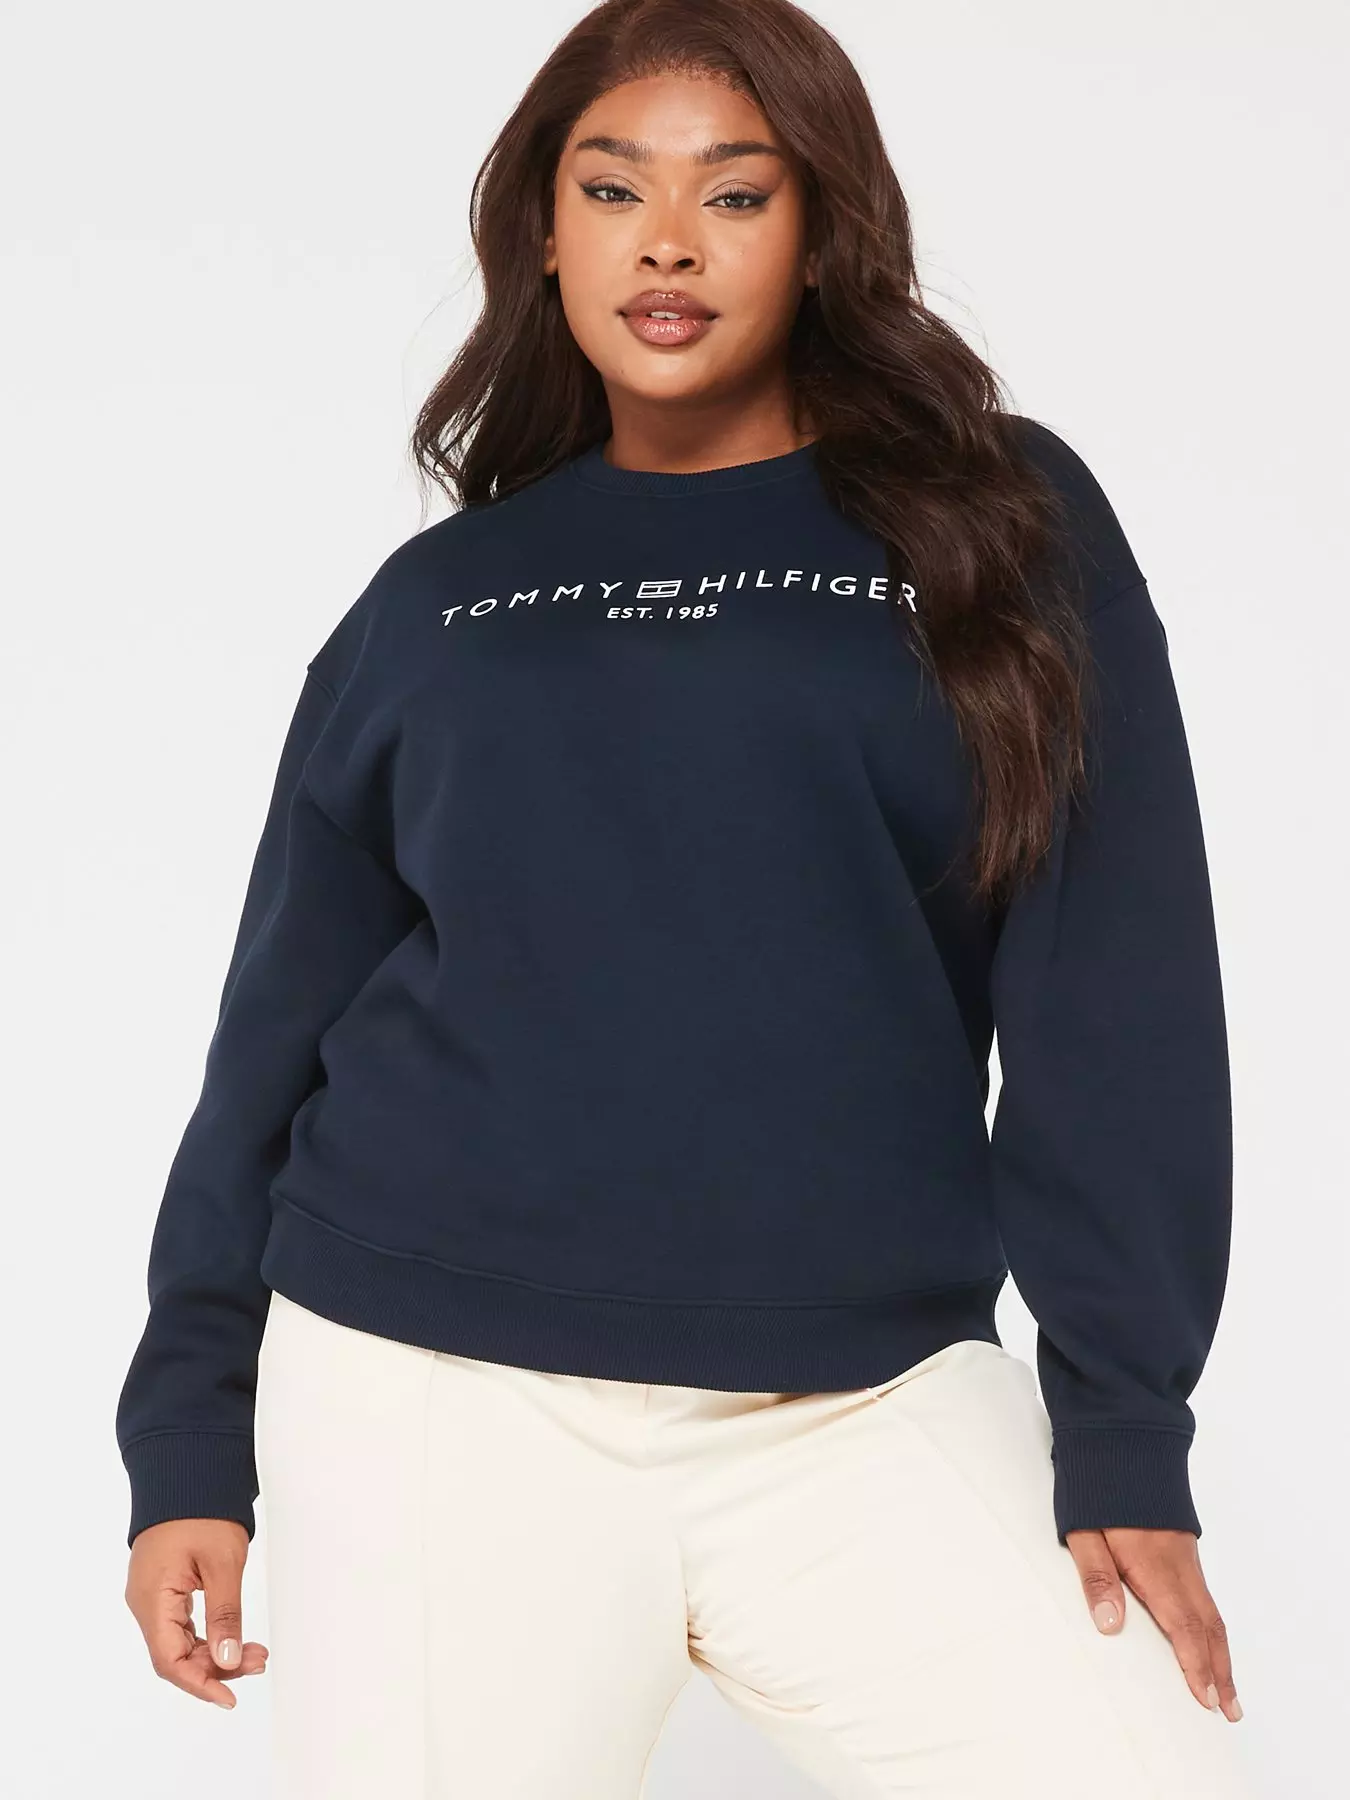 Women's Tommy Hilfiger Clothes & Accessories